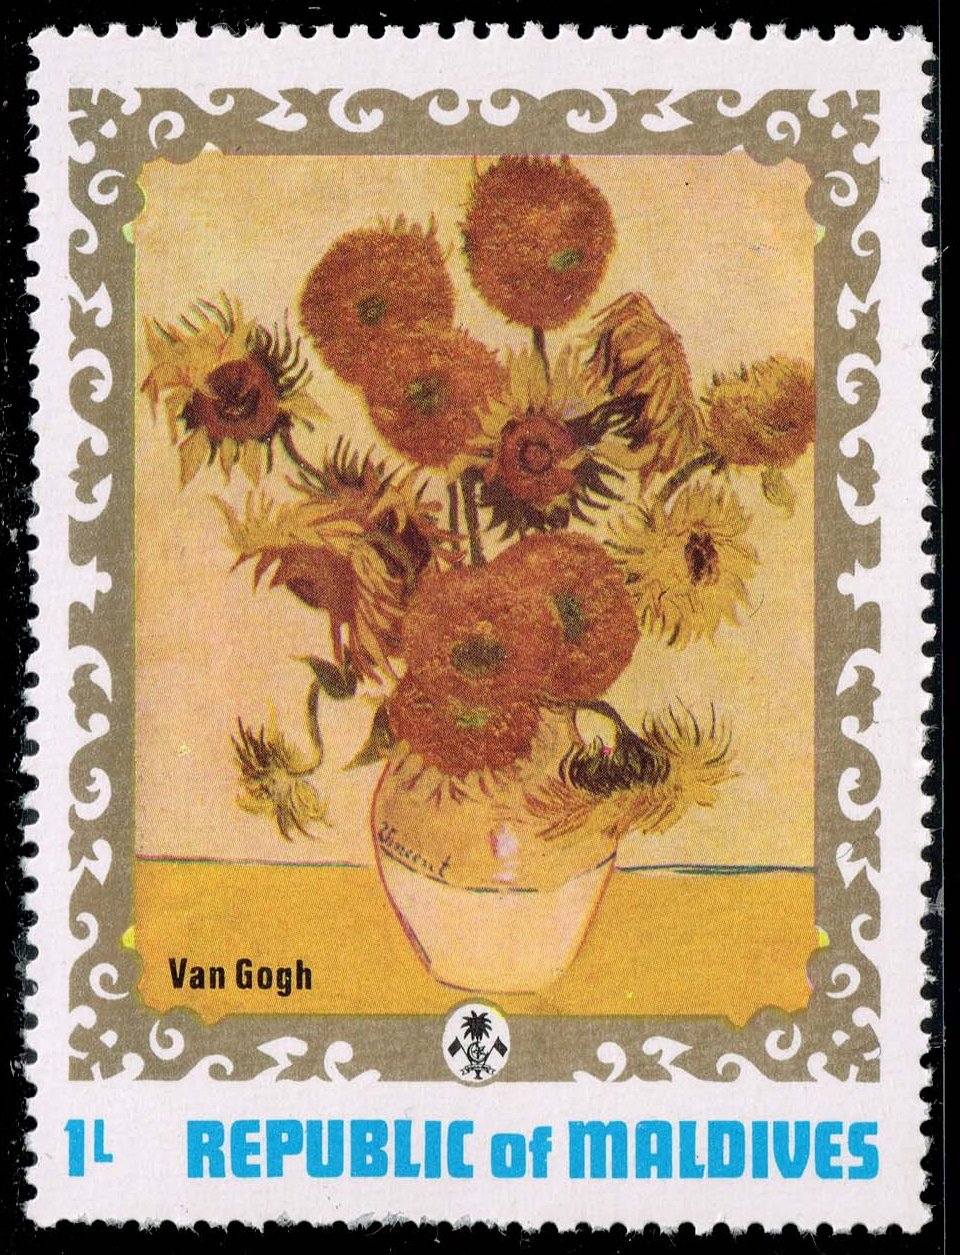 Maldives #420 Sunflowers by Van Gogh; MNH - Click Image to Close